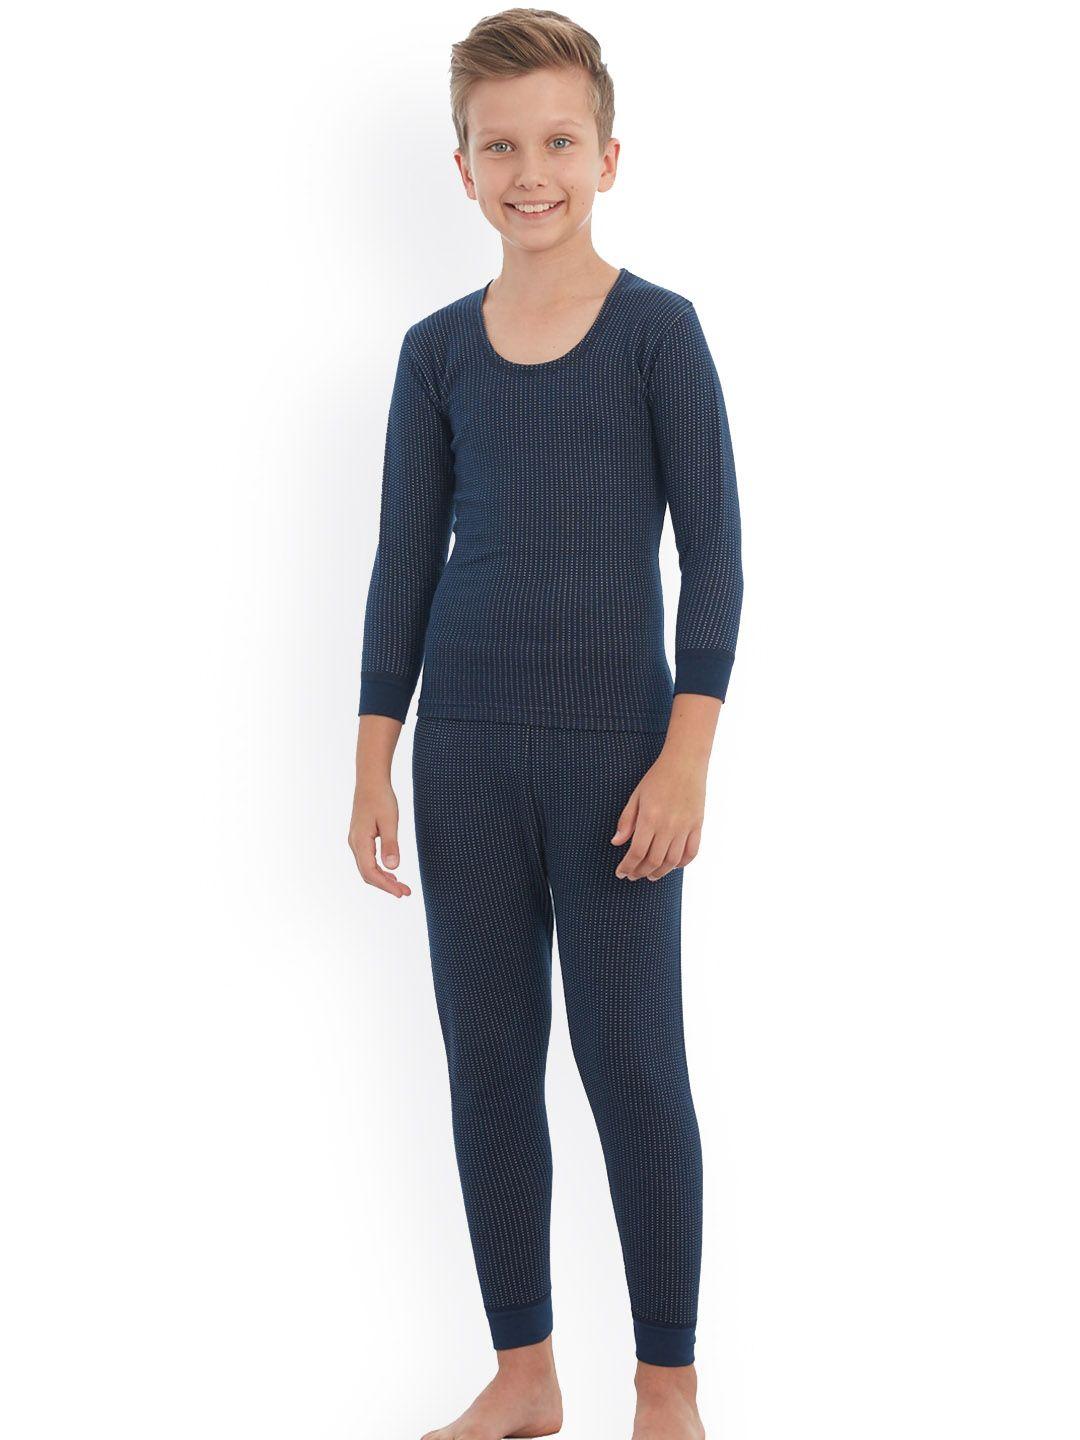 bodycare-insider-kids-boys-top-and-thermal-bottoms